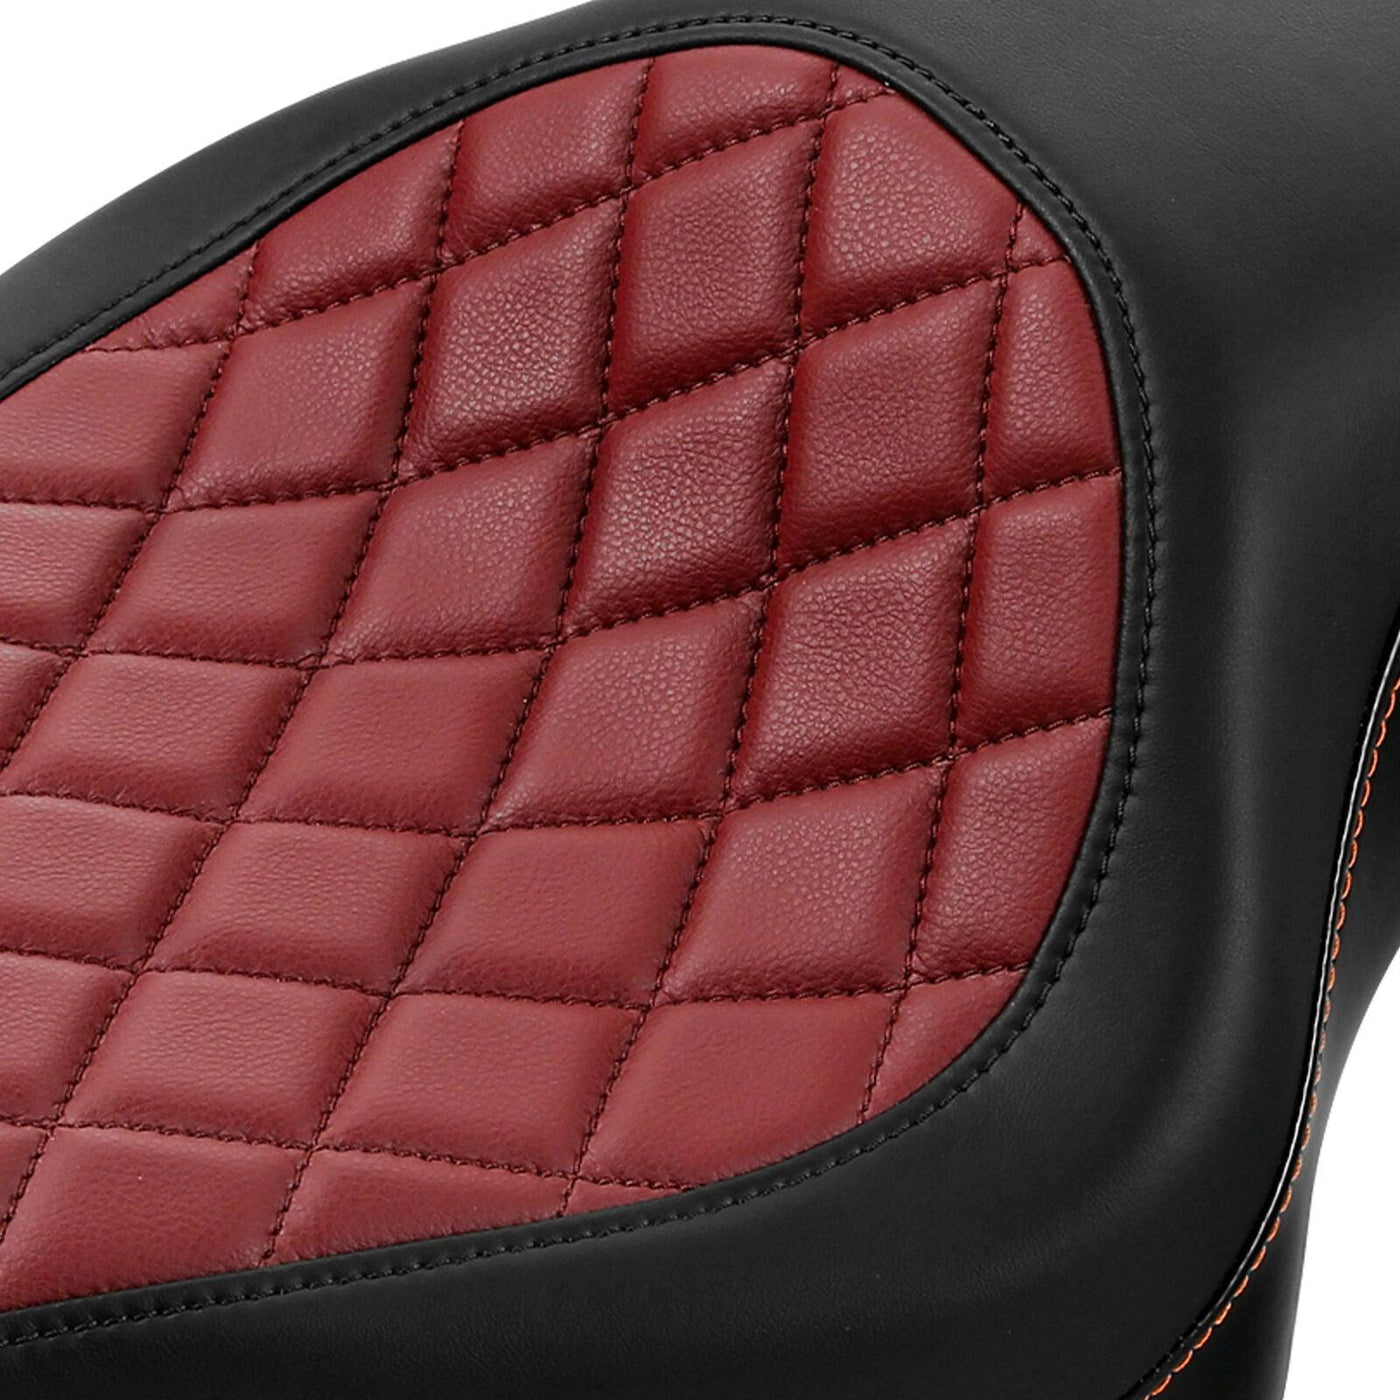 Rider Driver & Passenger Seat Fit For Harley Sportster 883 1200 Custom 2004-2021 - Moto Life Products